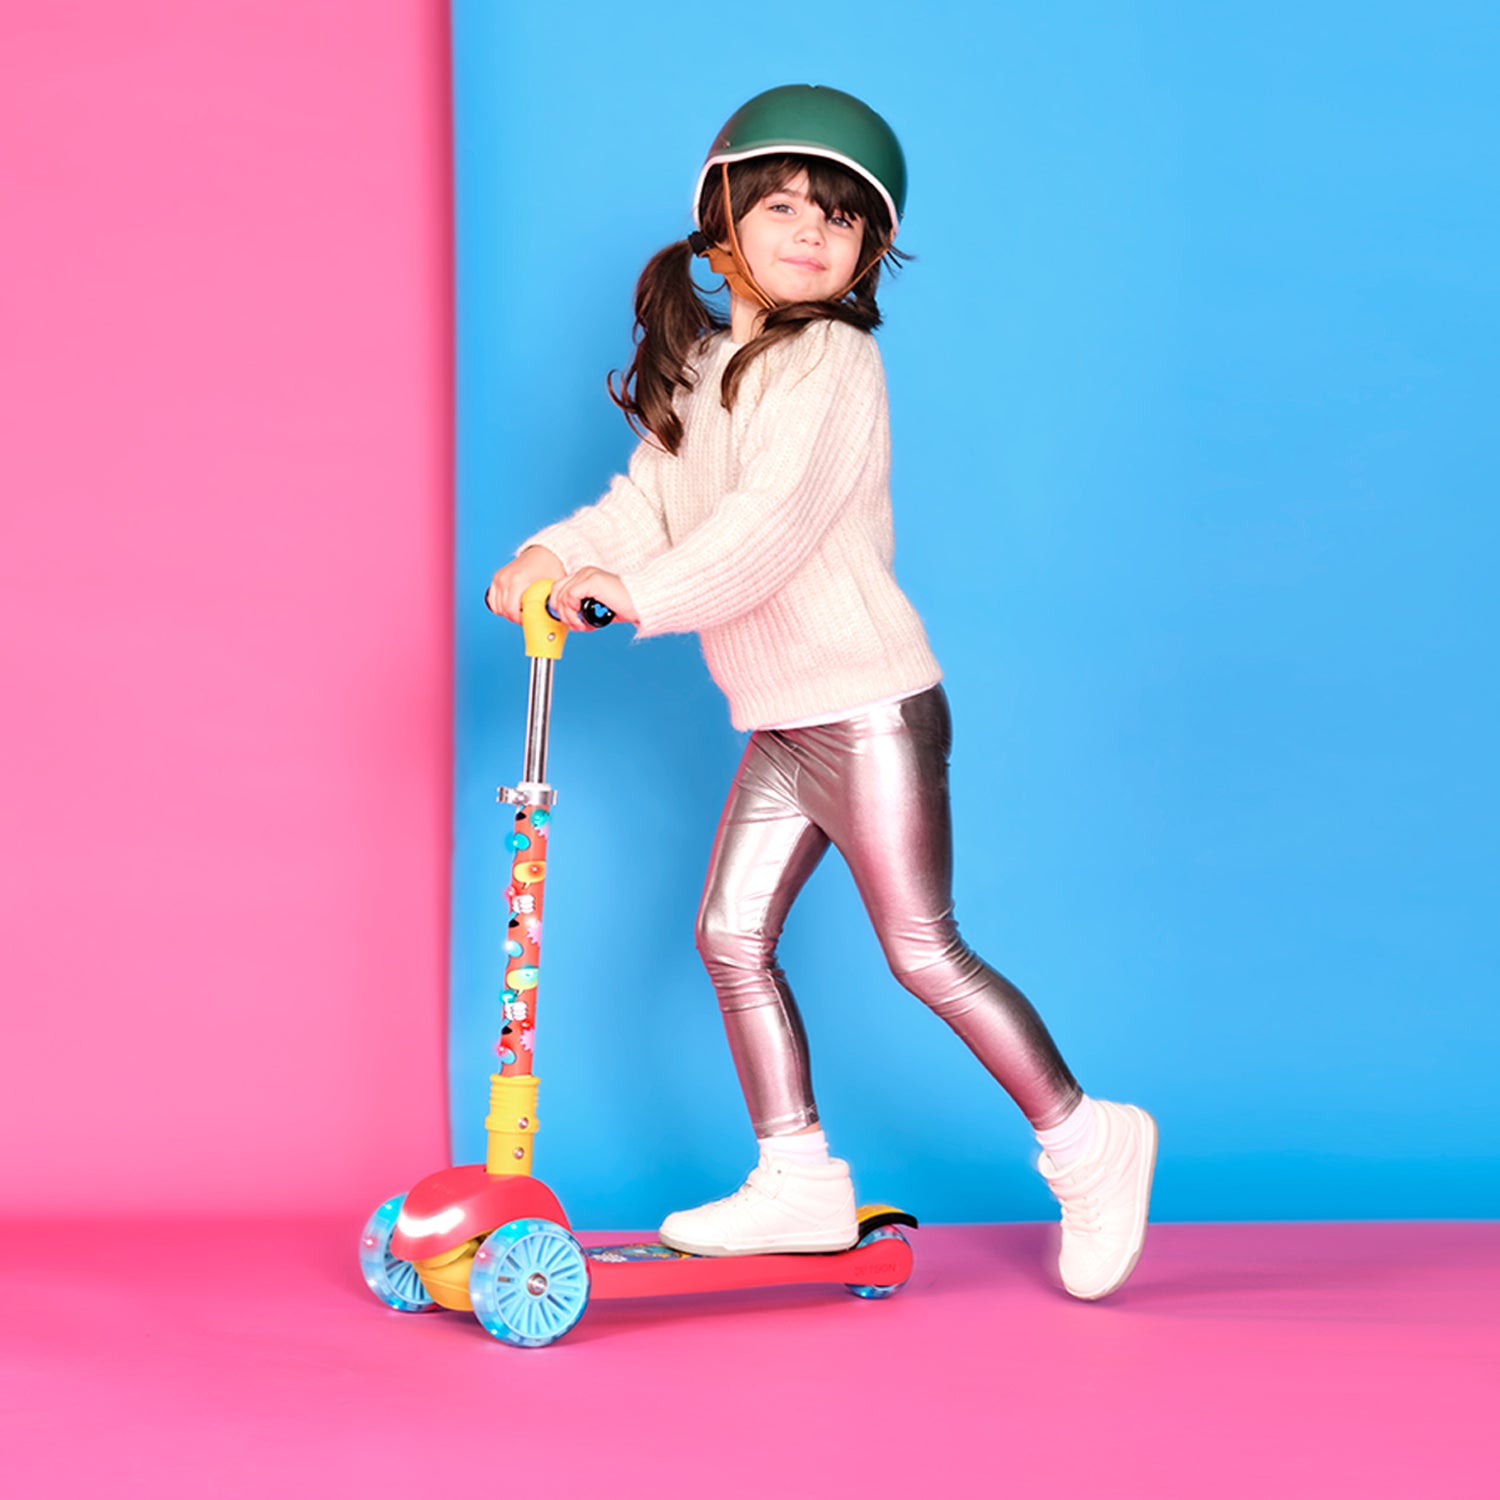 young girl riding mickey mouse kick scooter